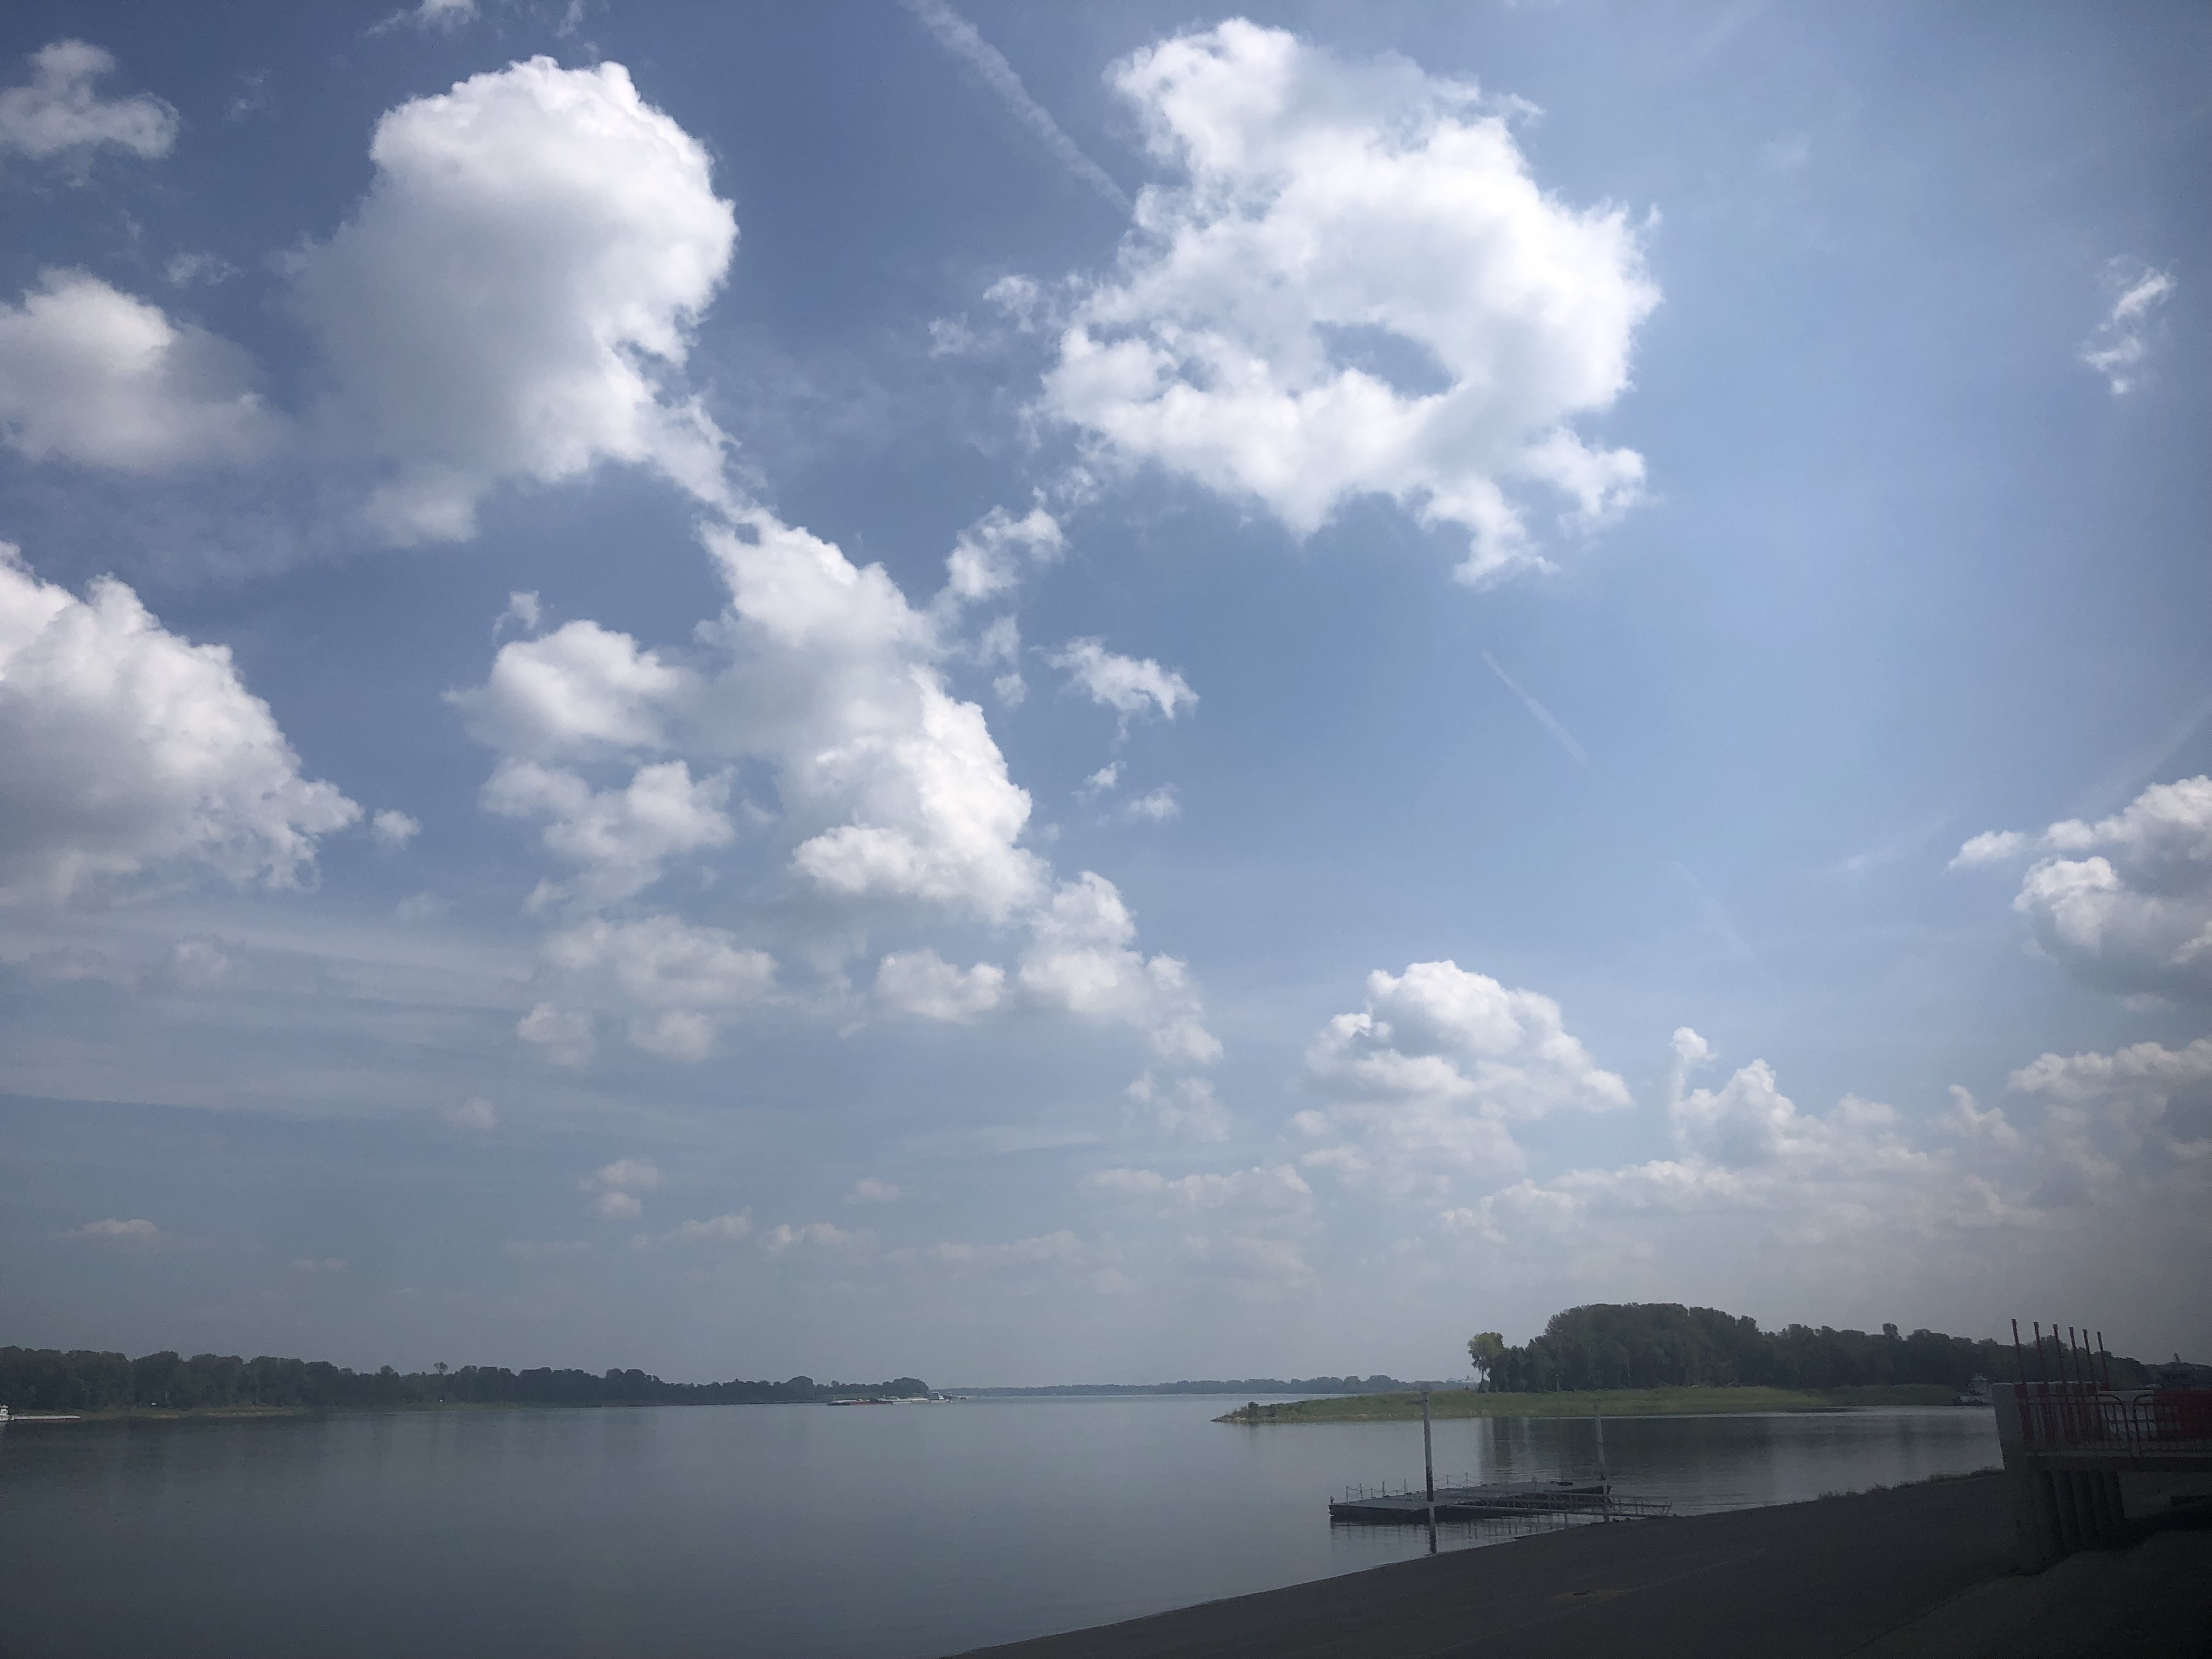 View of Paducah waterway at the confluence of the Tennessee and the Ohio rivers on a very sunny day with scattered clouds. (Austyn Gaffney)